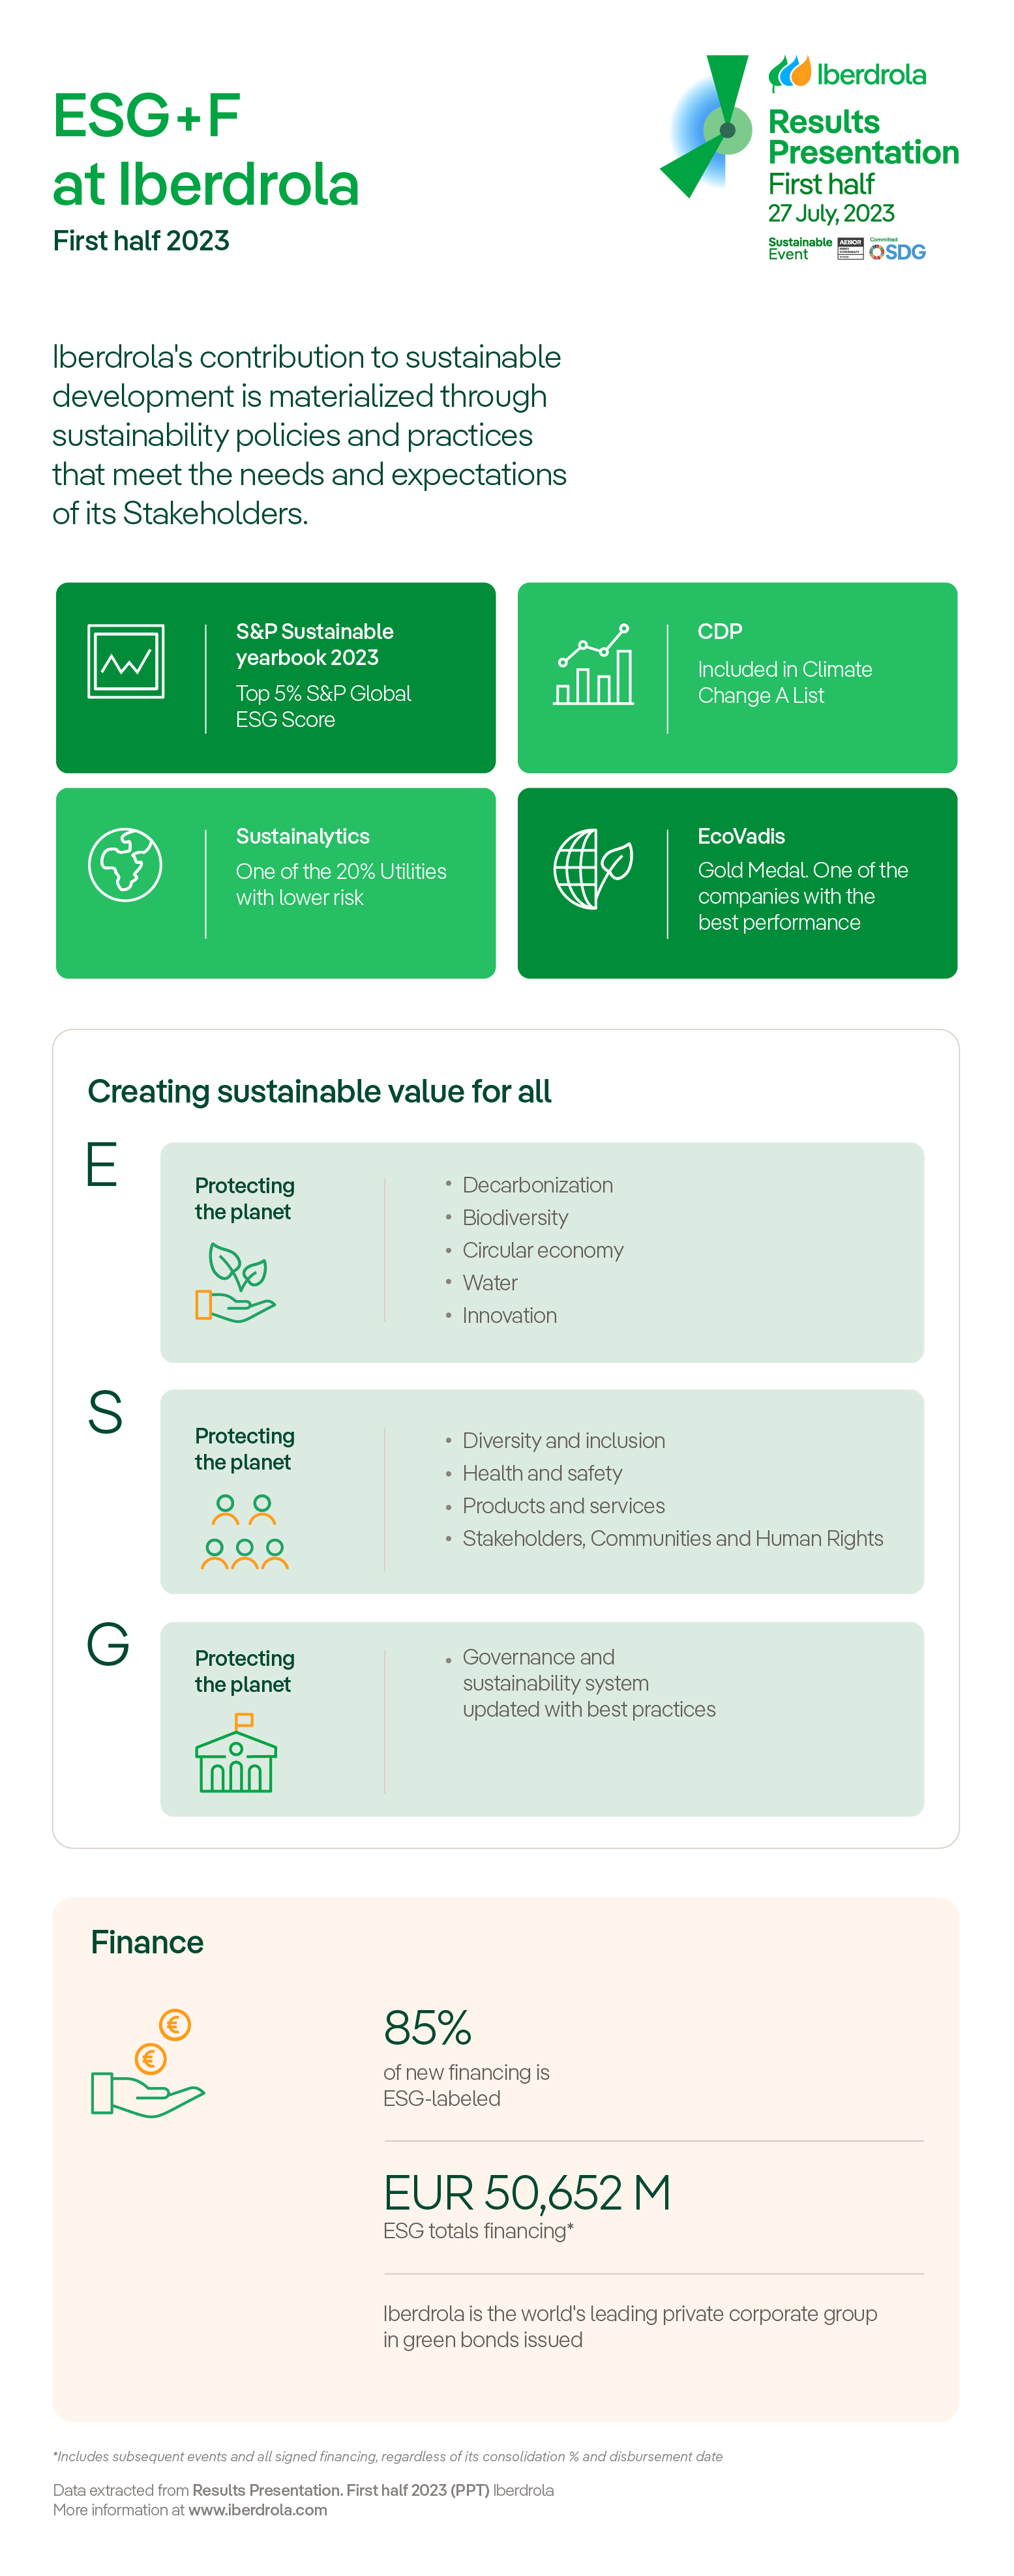 ESG+F at Iberdrola. Extracted from the First Half 2023 Results Presentation